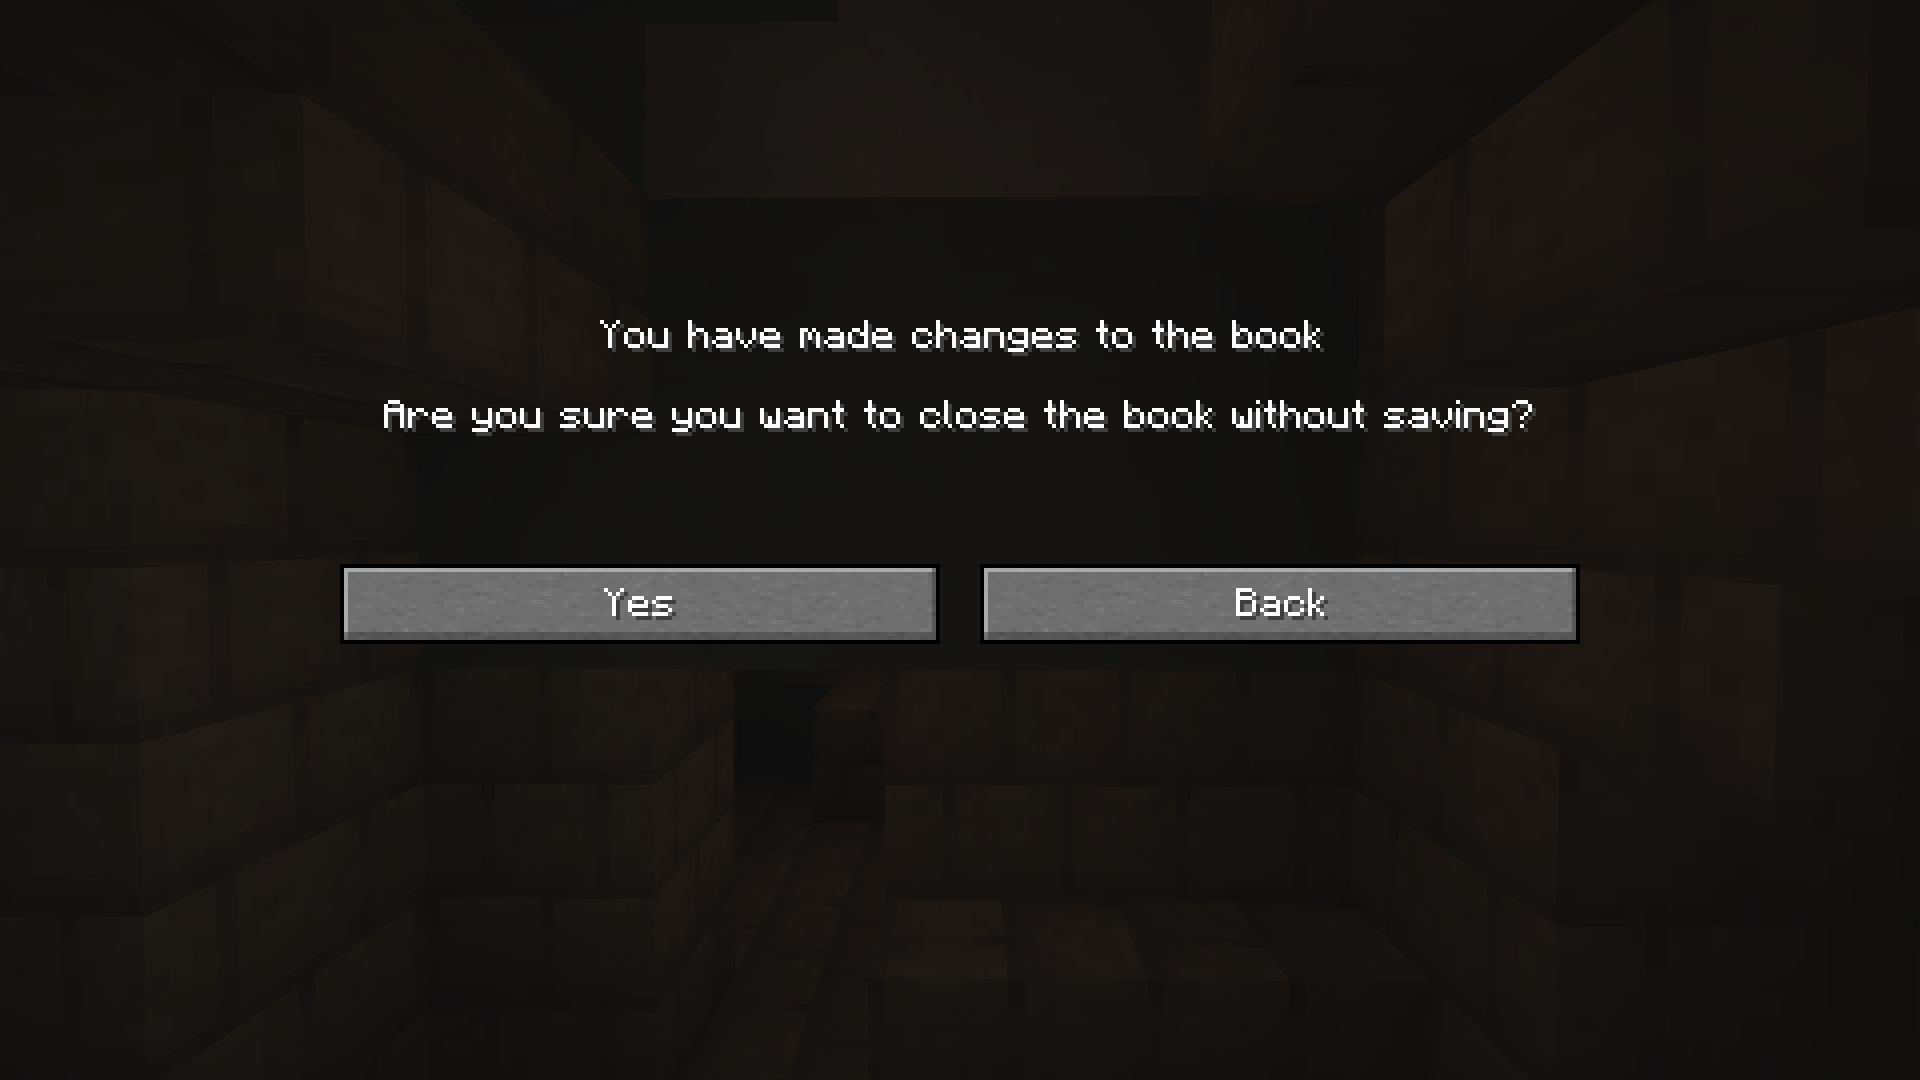 Confirmation Screen in Minecraft, the title is "You have made changes to the book", the question is "Are you sure you want to close the book without saving?", and there are two buttons "Yes" and "Back"